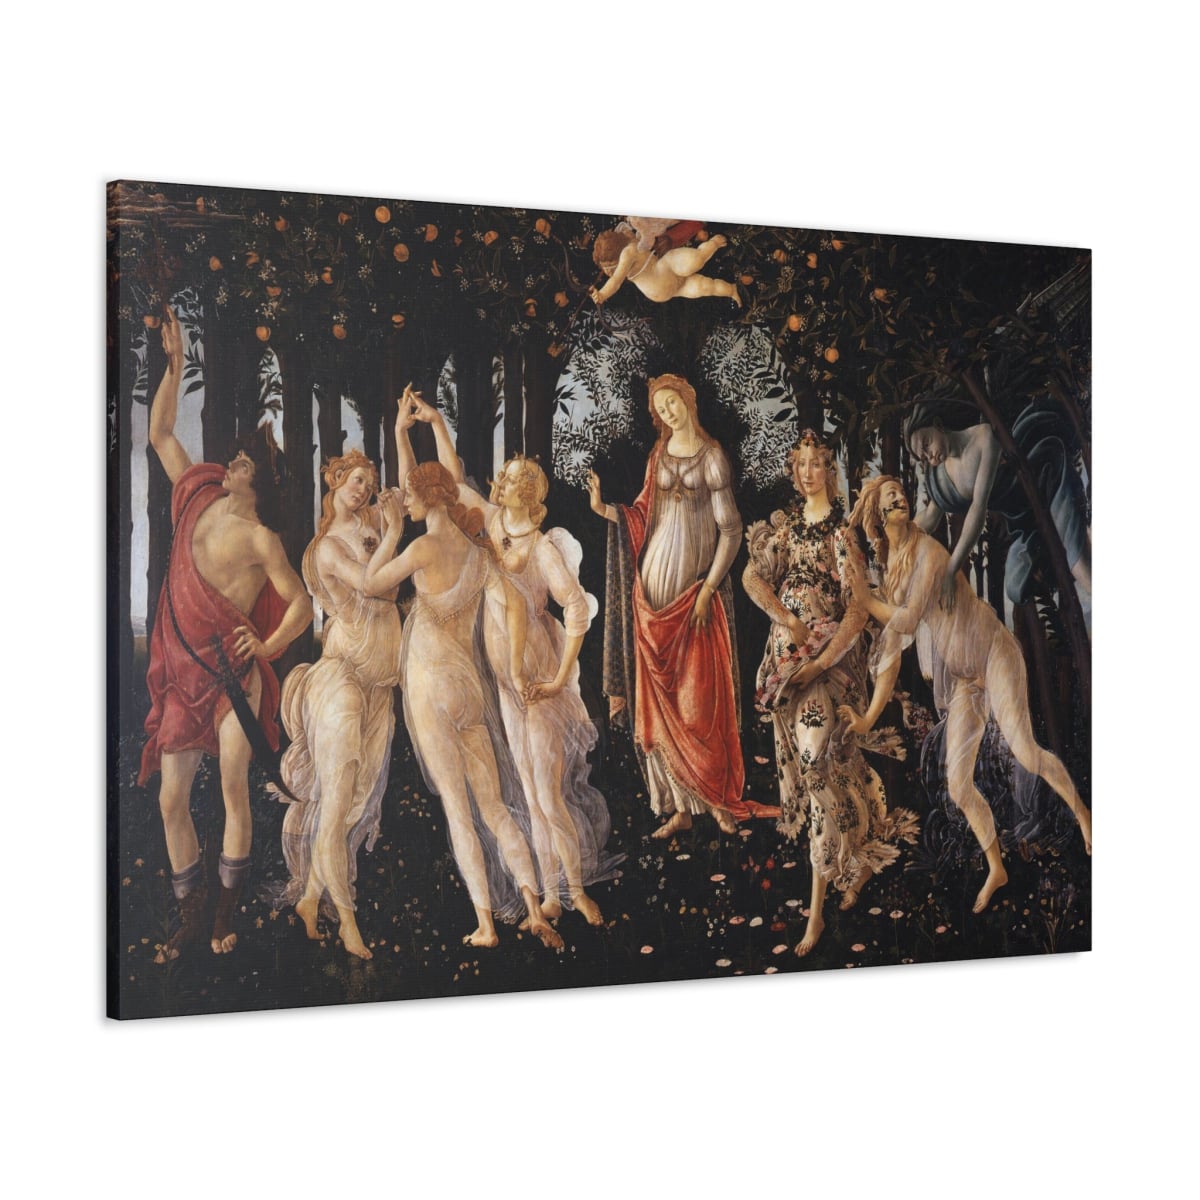 Discover Elegance with Primavera Canvas Wraps by Botticelli